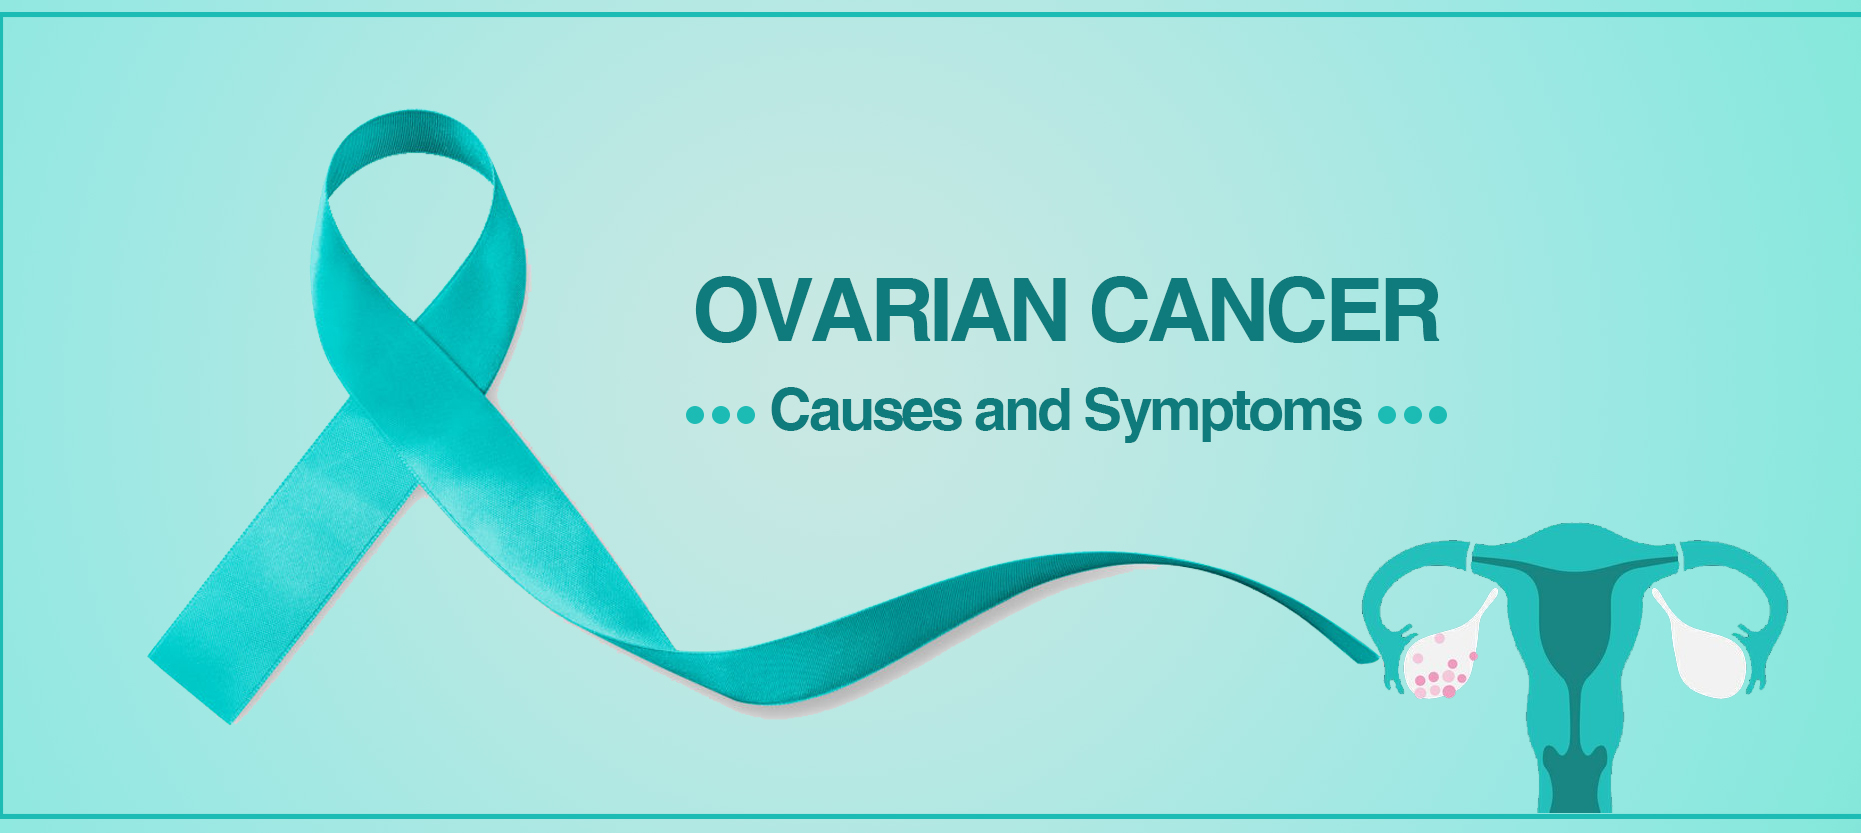 Ovarian cancer: Early detection is the key